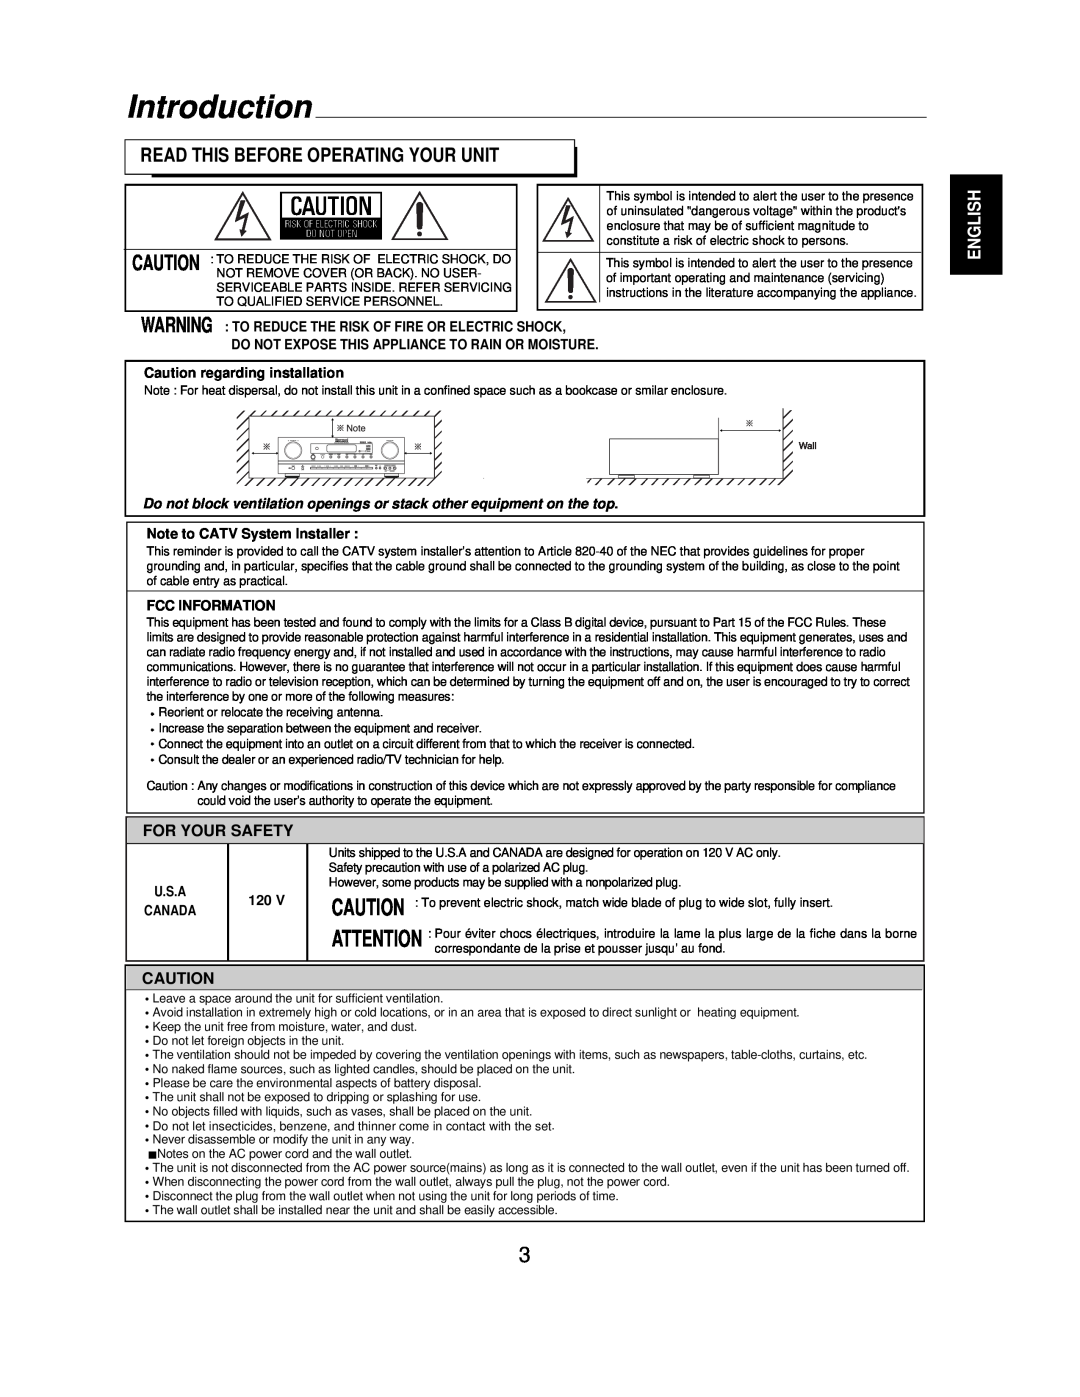 Sherwood R-771 manual Introduction, Read This Before Operating Your Unit, For Your Safety, English 